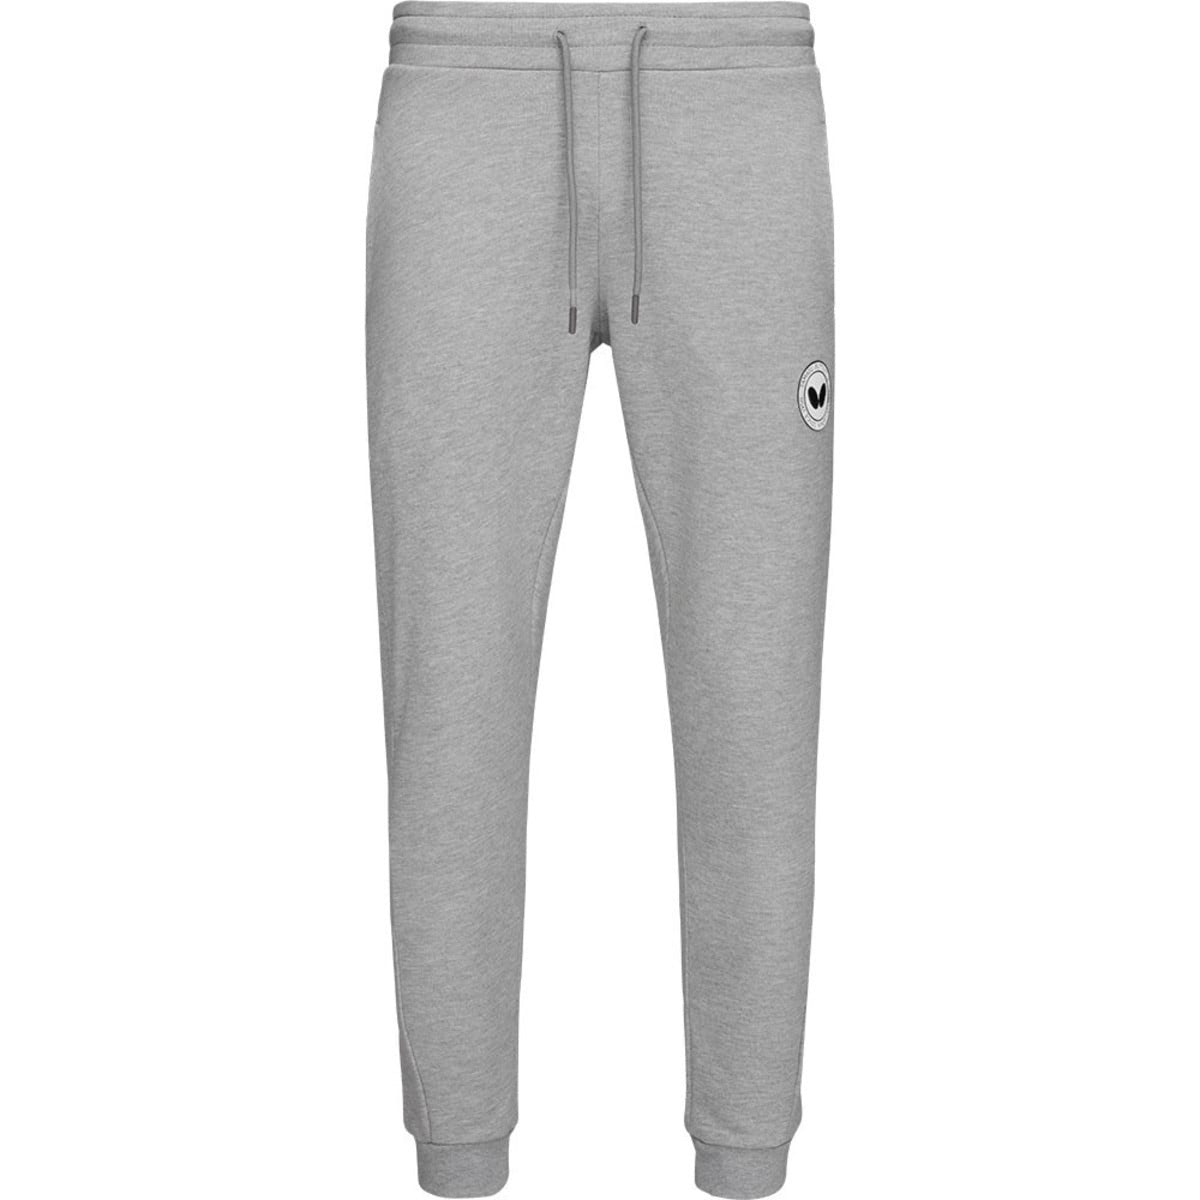 Butterfly Kihon Tracksuit Pants - Grey